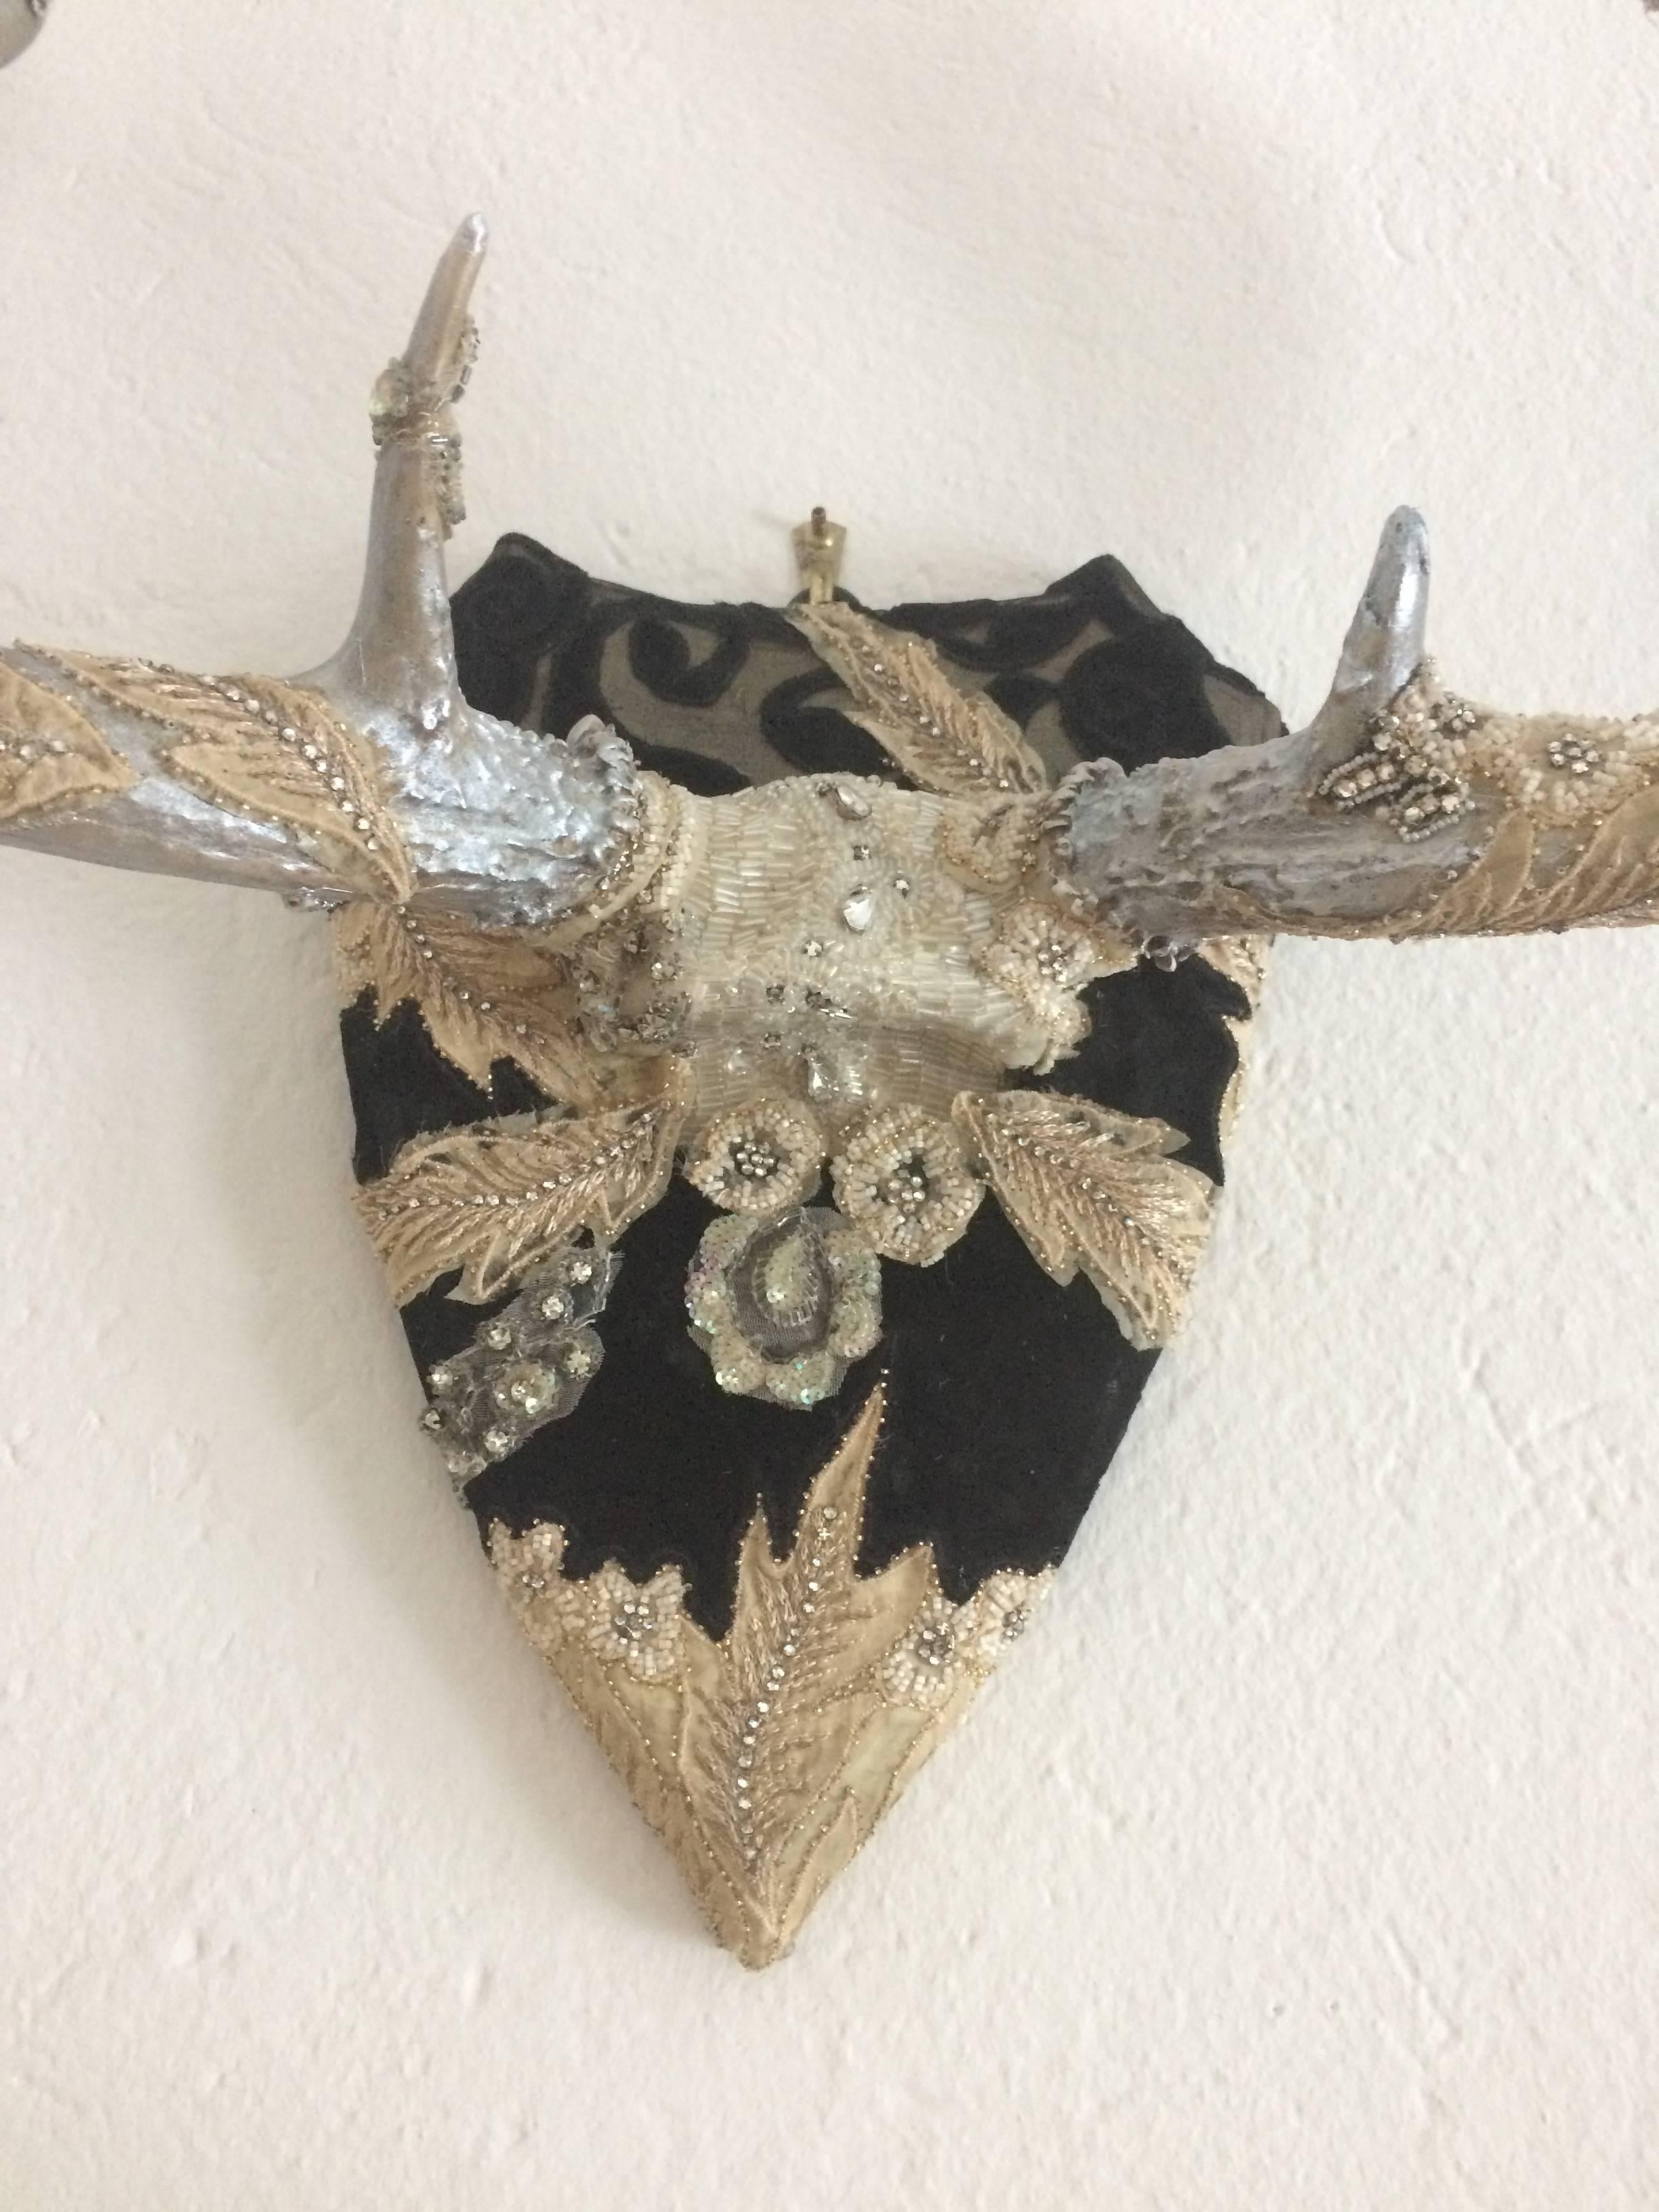 Magical mixed-media wall art beginning with a pair of branch like antlers, transformed into a romantic wall sculpture with silver leaf and be jewelry antlers and a shield covered in velvet applique, lace, rhinetones and other vintage embellishments.